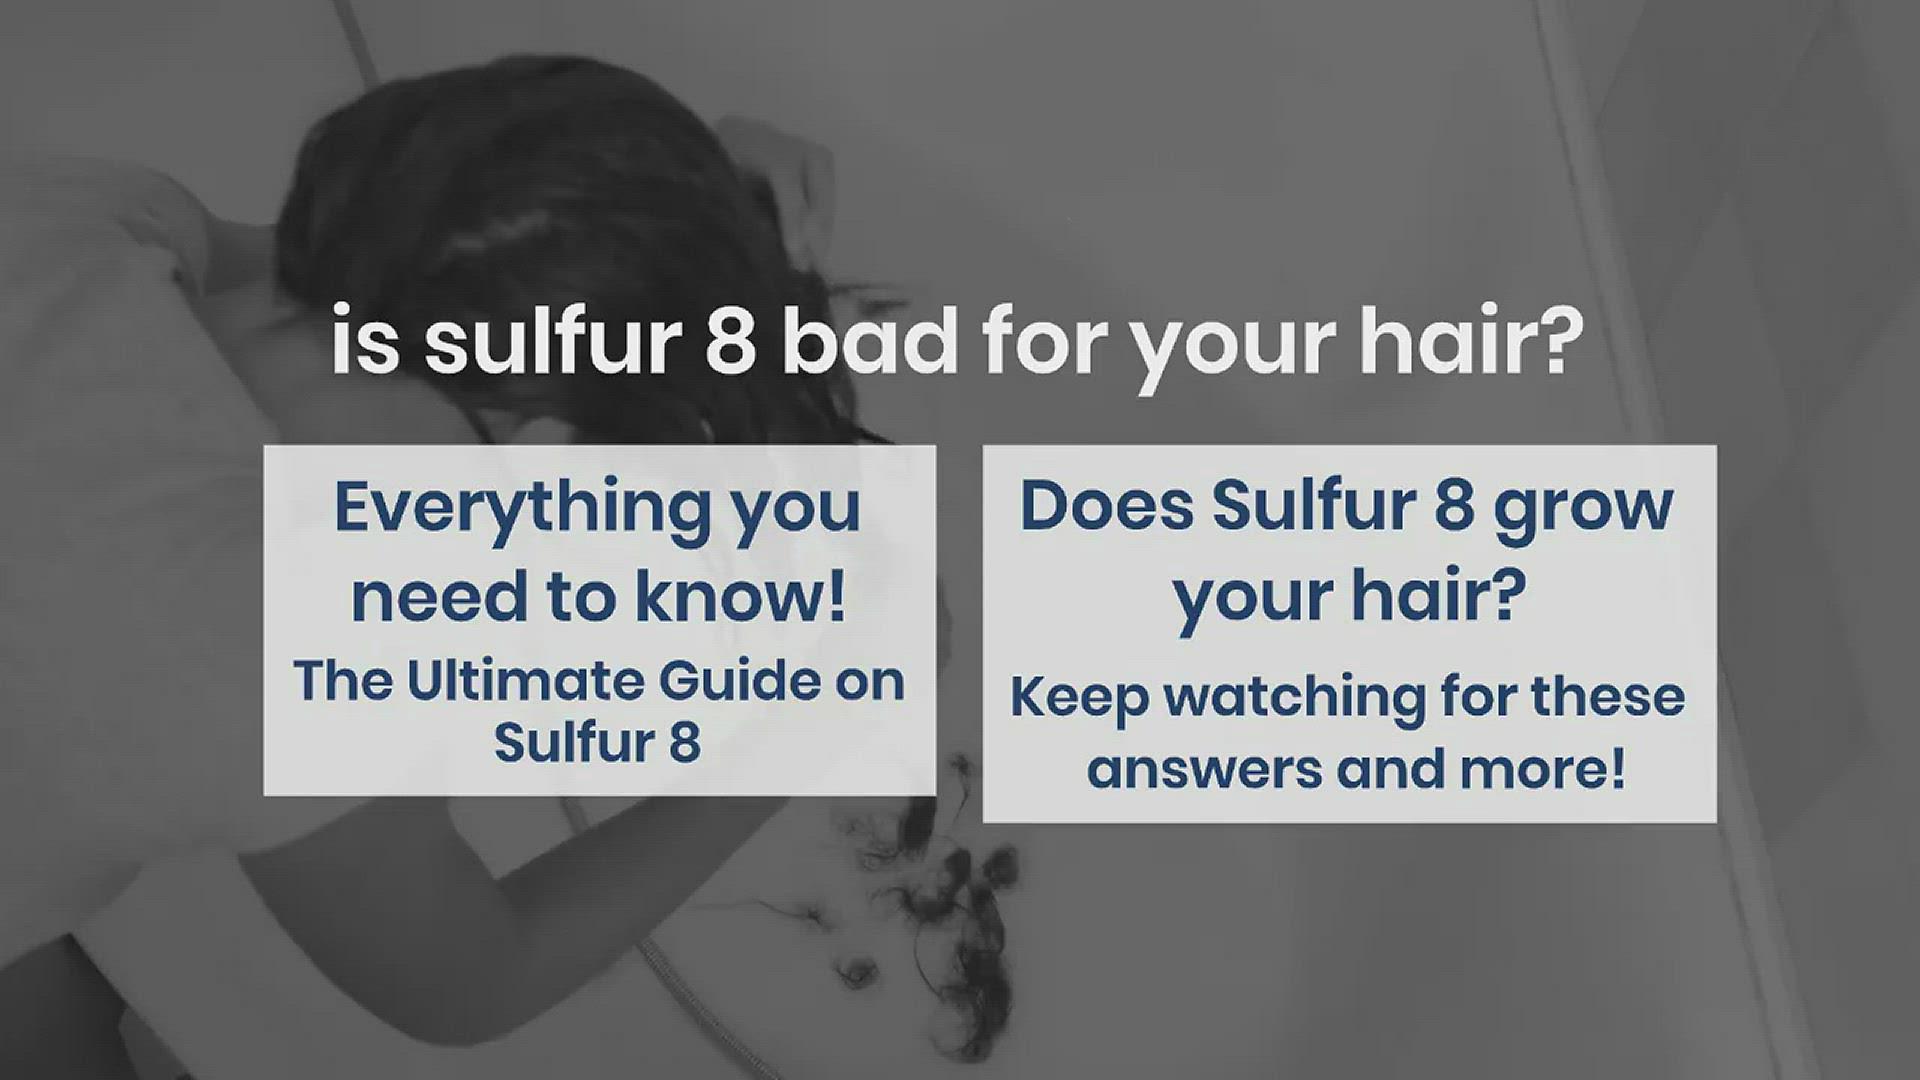 'Video thumbnail for is sulfur 8 bad for your hair?'